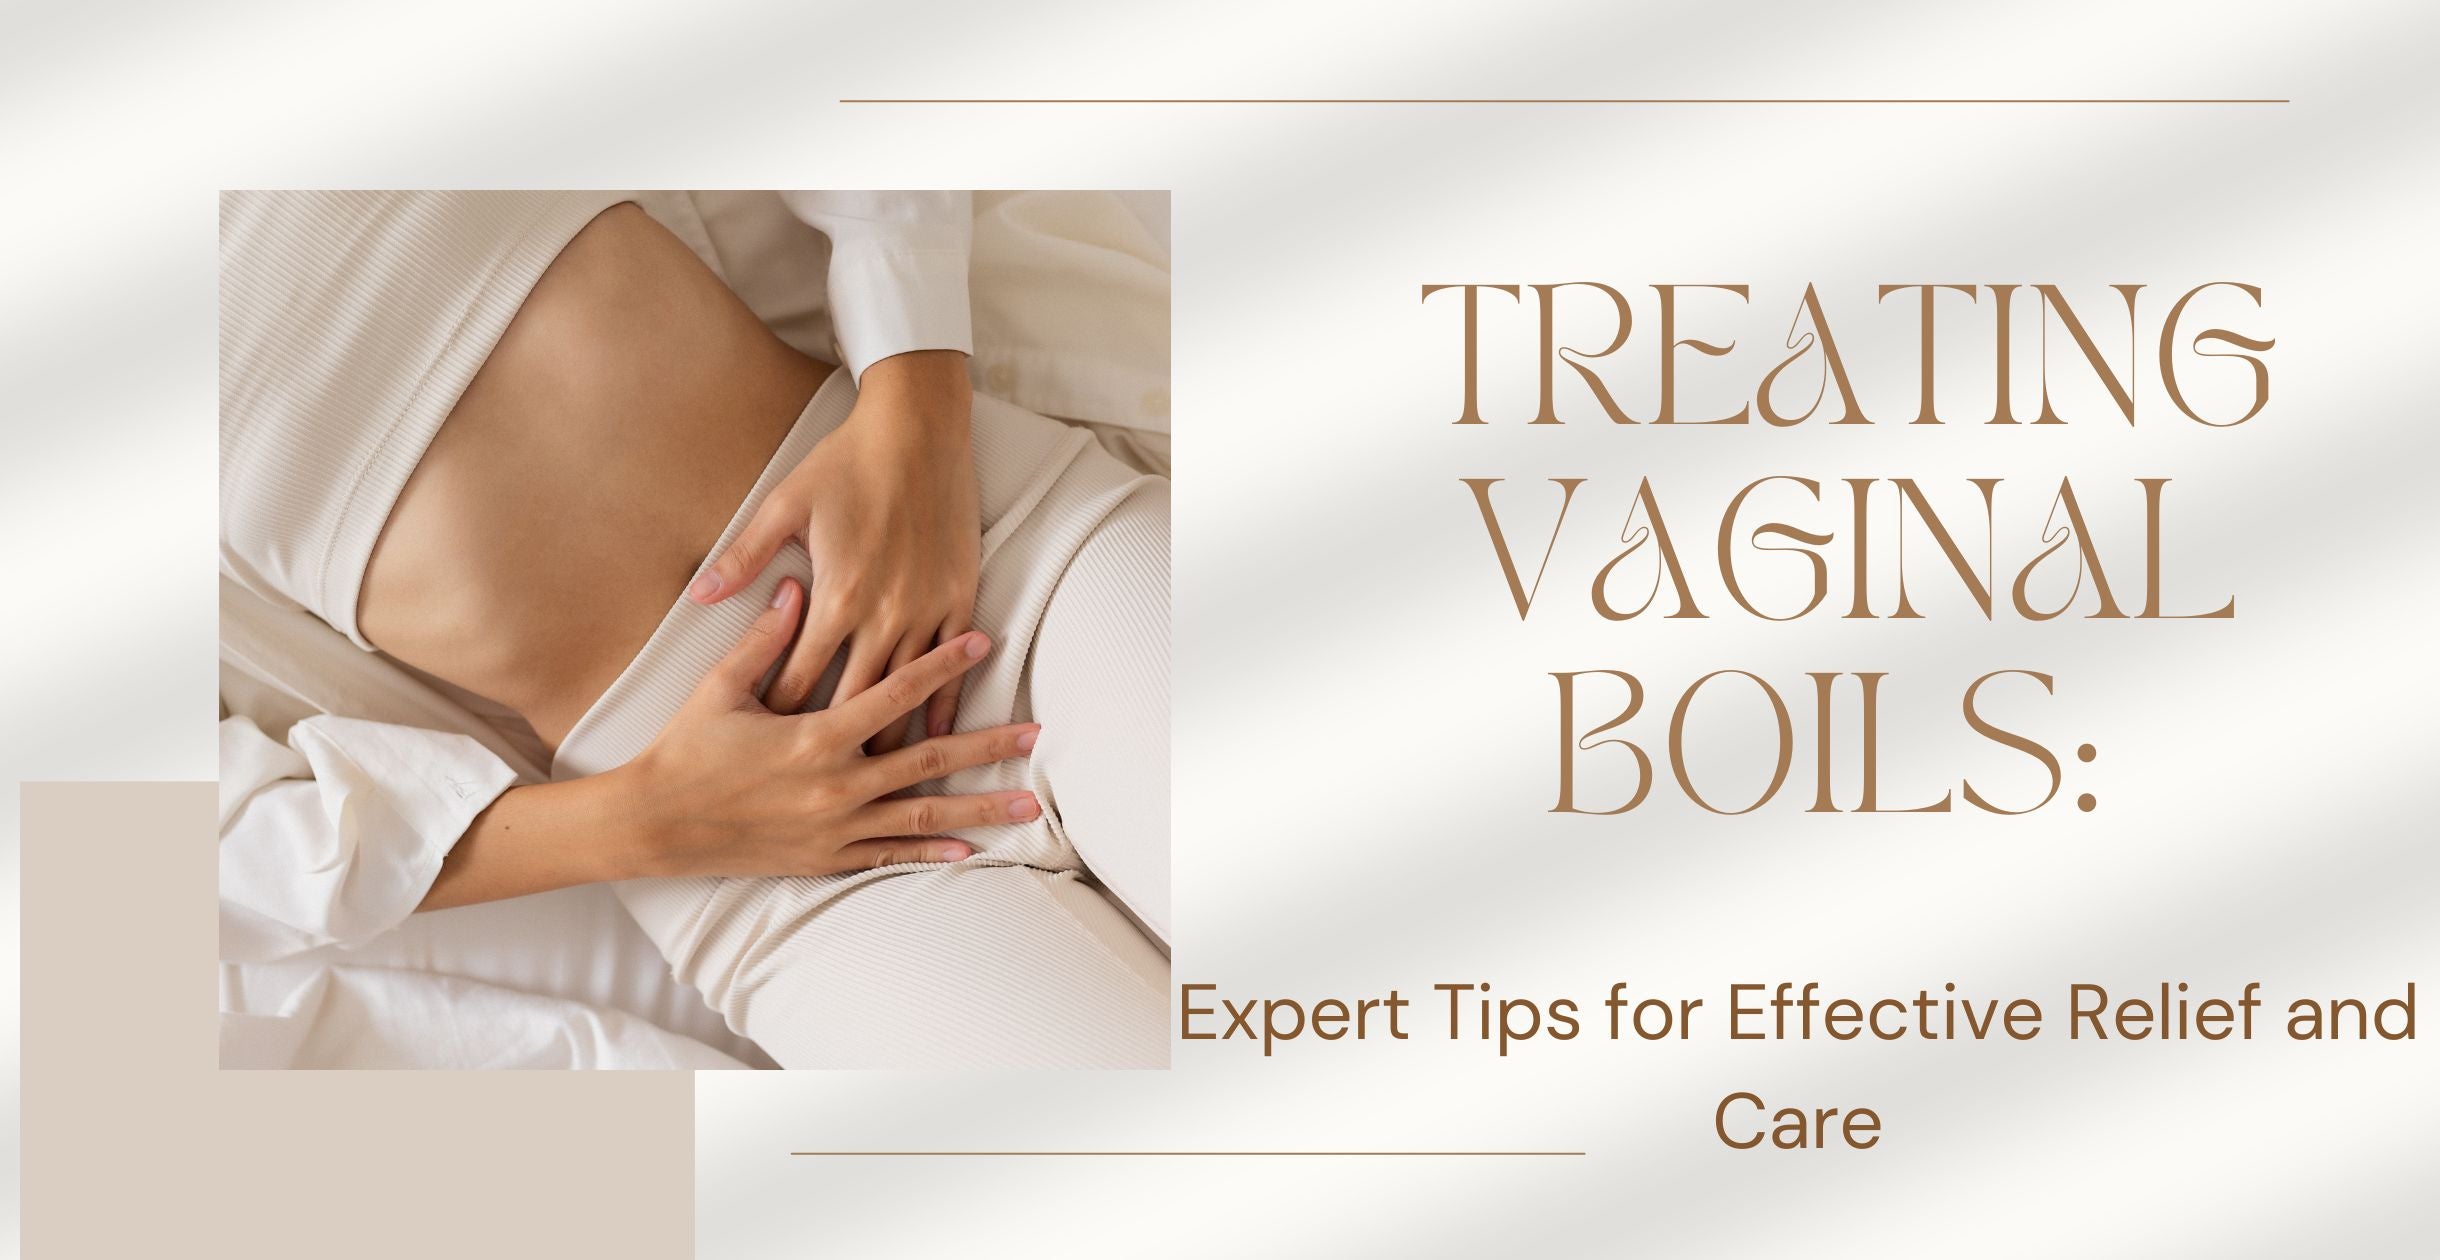 Treating Vaginal Boils: Expert Tips for Effective Relief and Care